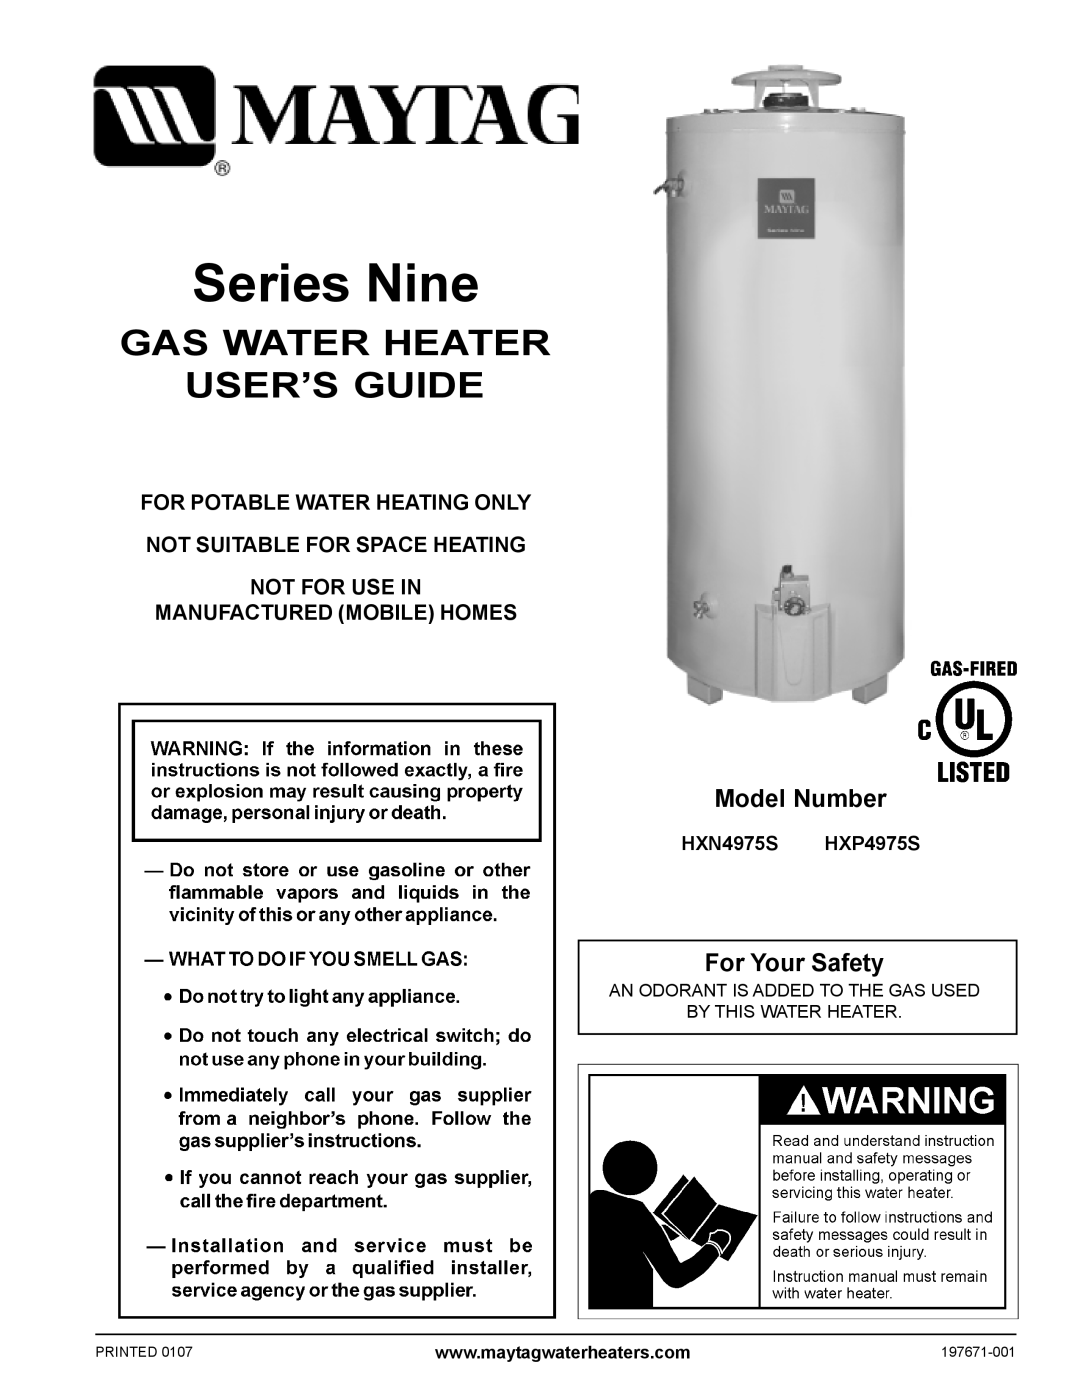 Maytag HXN4975S manual Gas Water Heater User’S Guide, Model Number, For Your Safety, For Potable Water Heating Only 